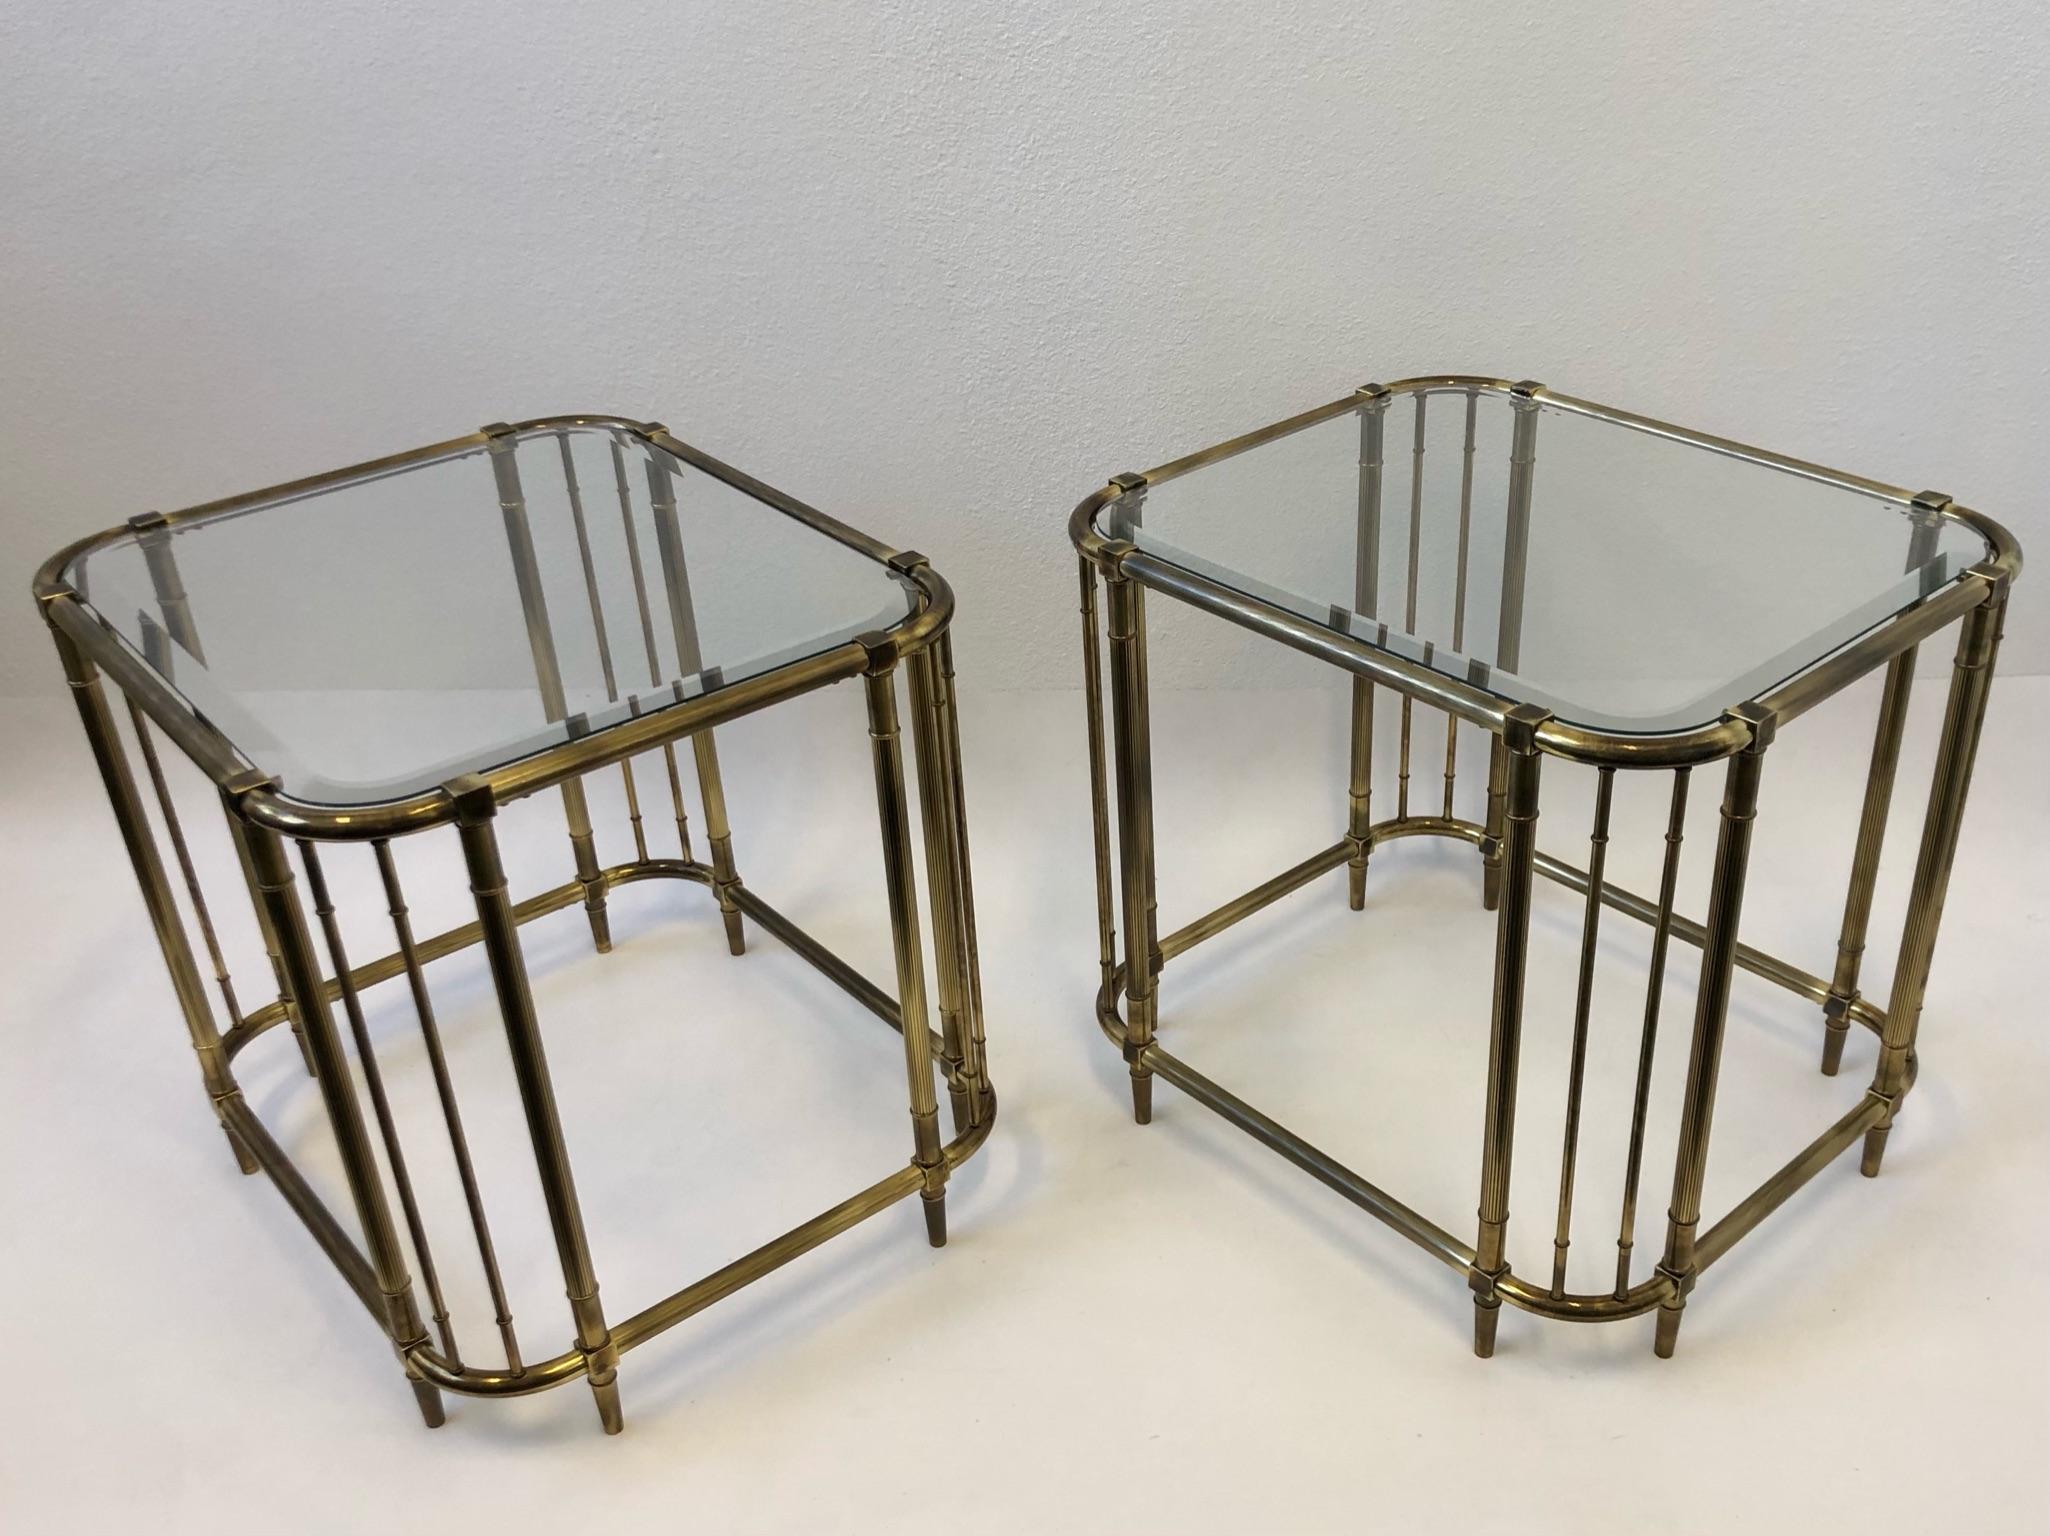 Pair of Aged Brass and Glass Side Tables by Mastercraft 1